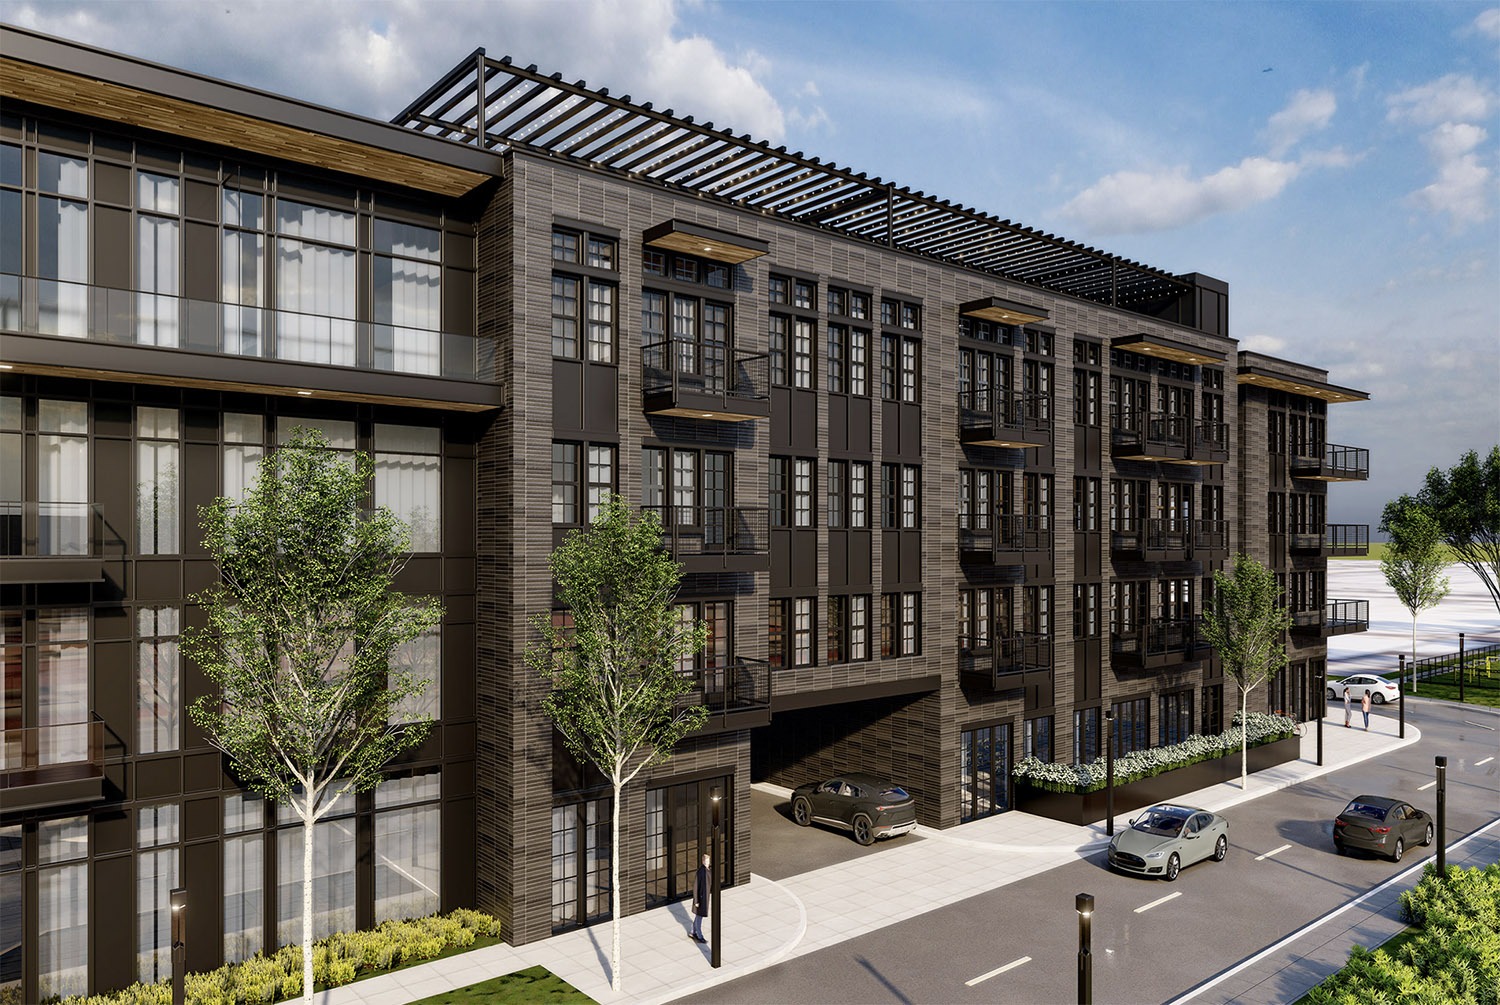 Vaquero Ventures of Fort Worth is planning to build a 340-unit apartment building at 1220 E. Commerce St. in east downtown. Renderings to be considered by the HDRC on Jan. 19, 2022. Courtesy Merriman Anderson Architects